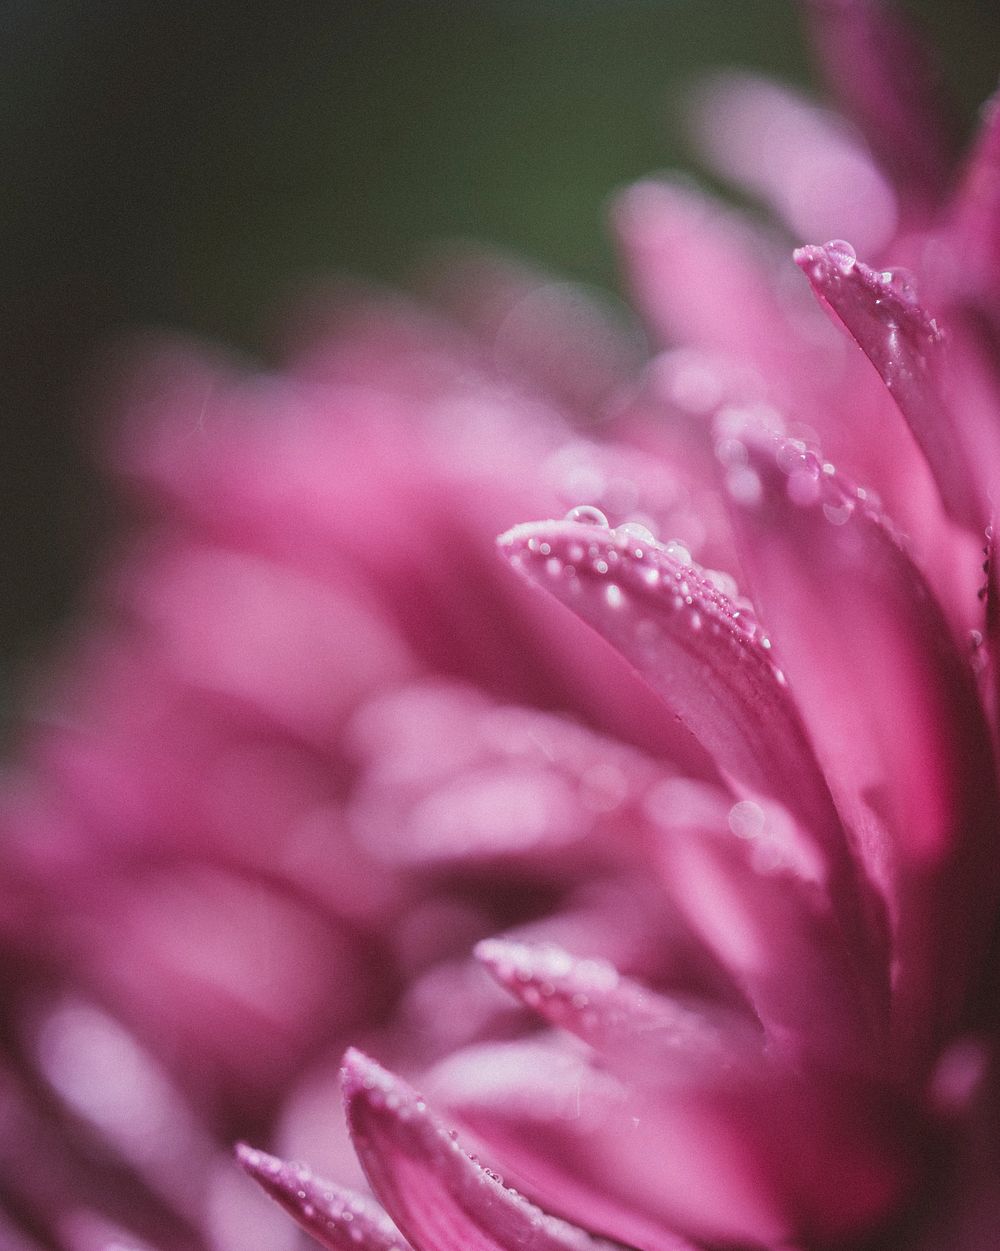 A macro shot of tiny droplets of water on pink flower petals. Original public domain image from Wikimedia Commons